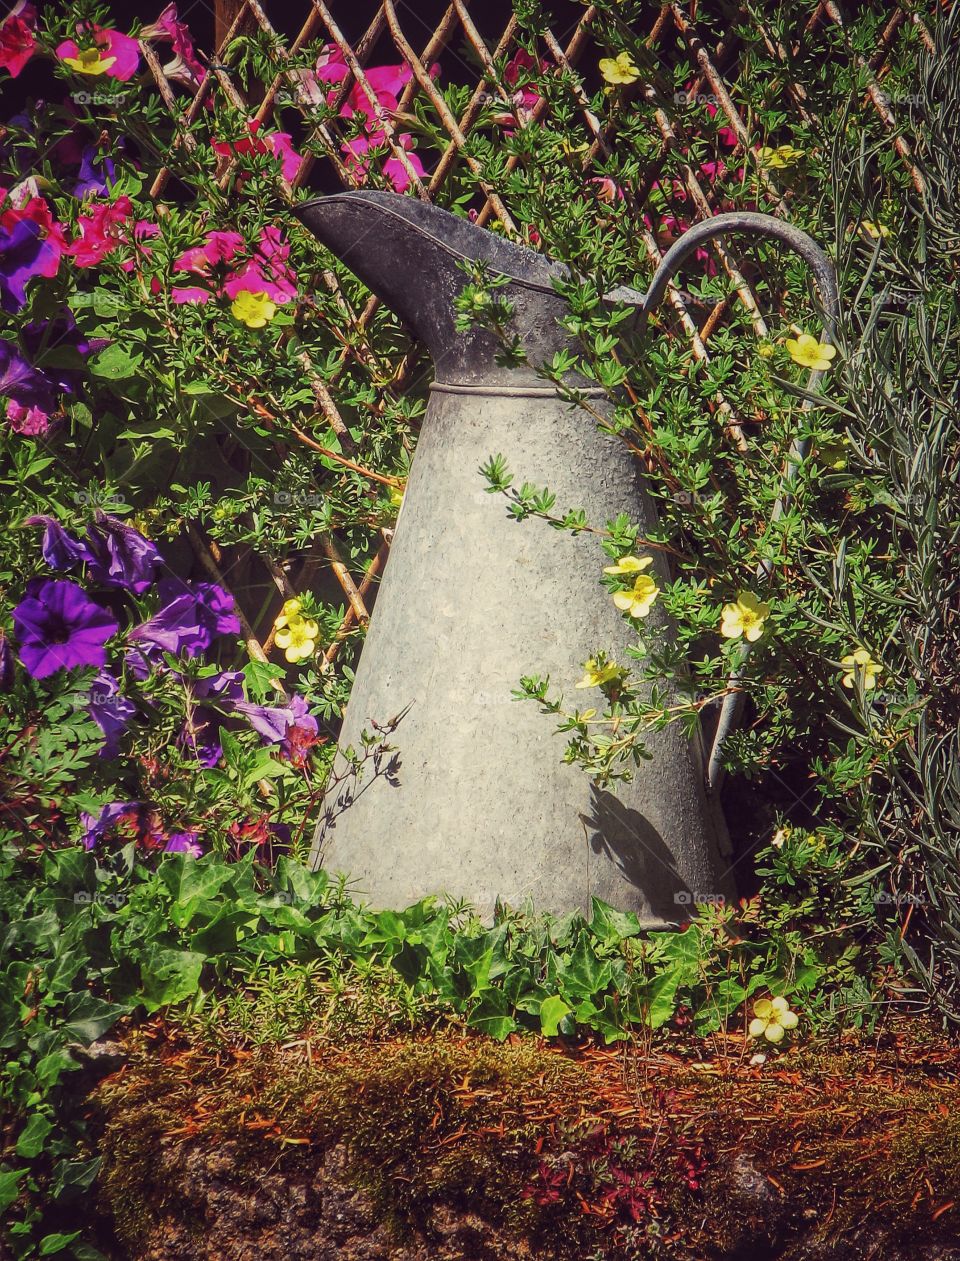 A large metal milking jug sitting on a stone wall and surrounded by overgrown vines and plants. A jug disappearing in the undergrowth.